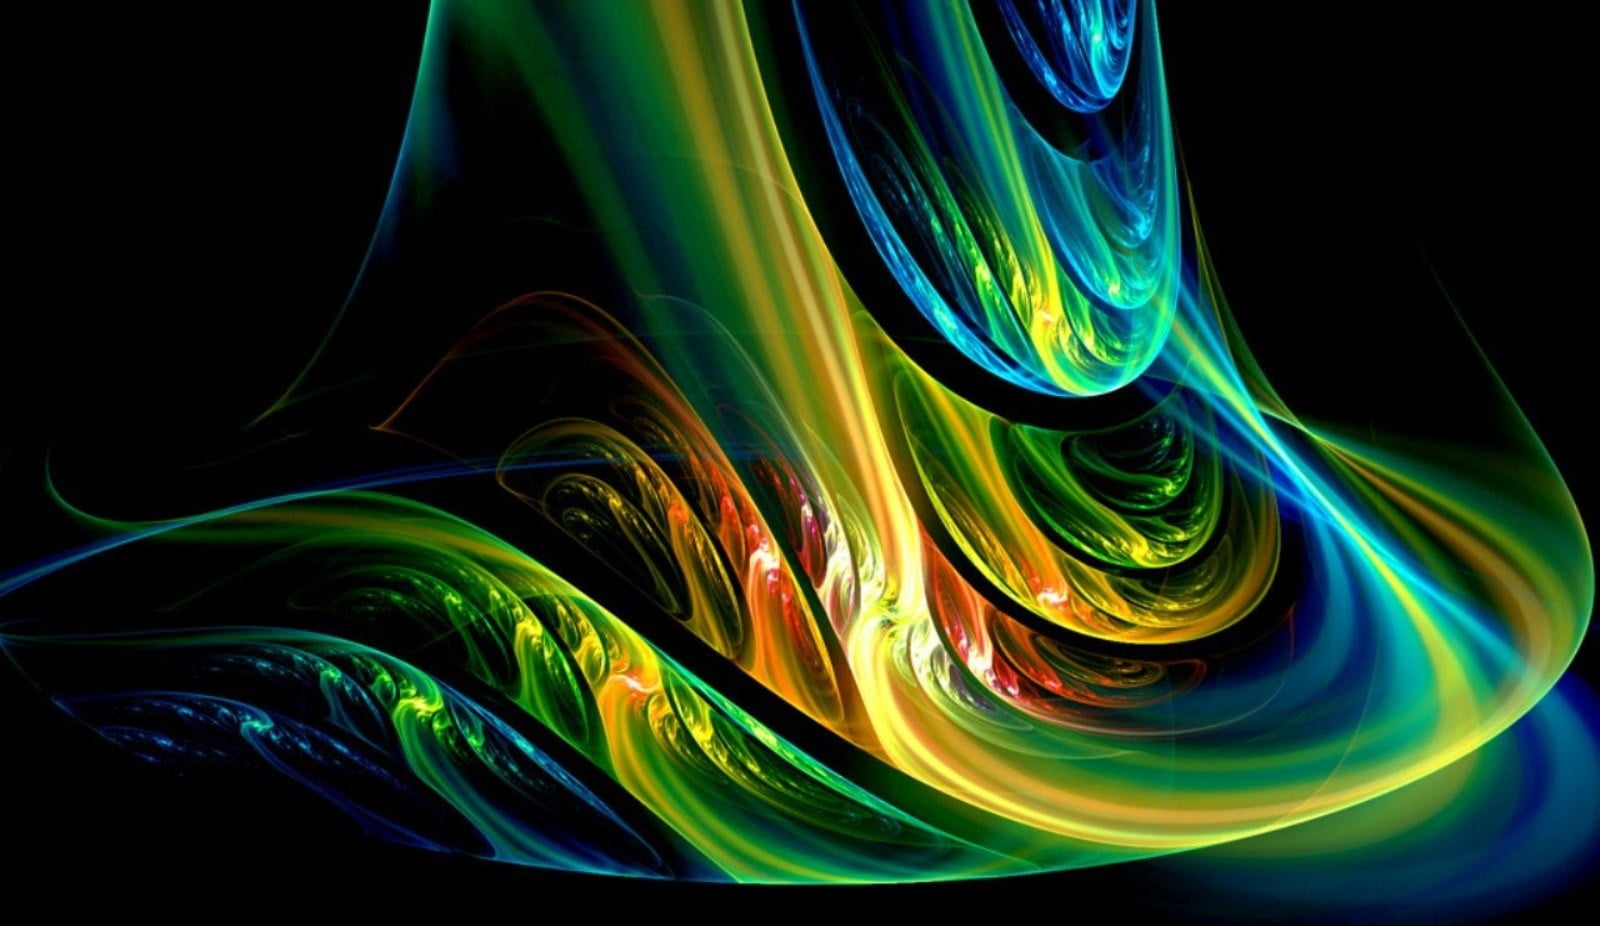 yellow, green, blue, and red digital wallpaper, abstract